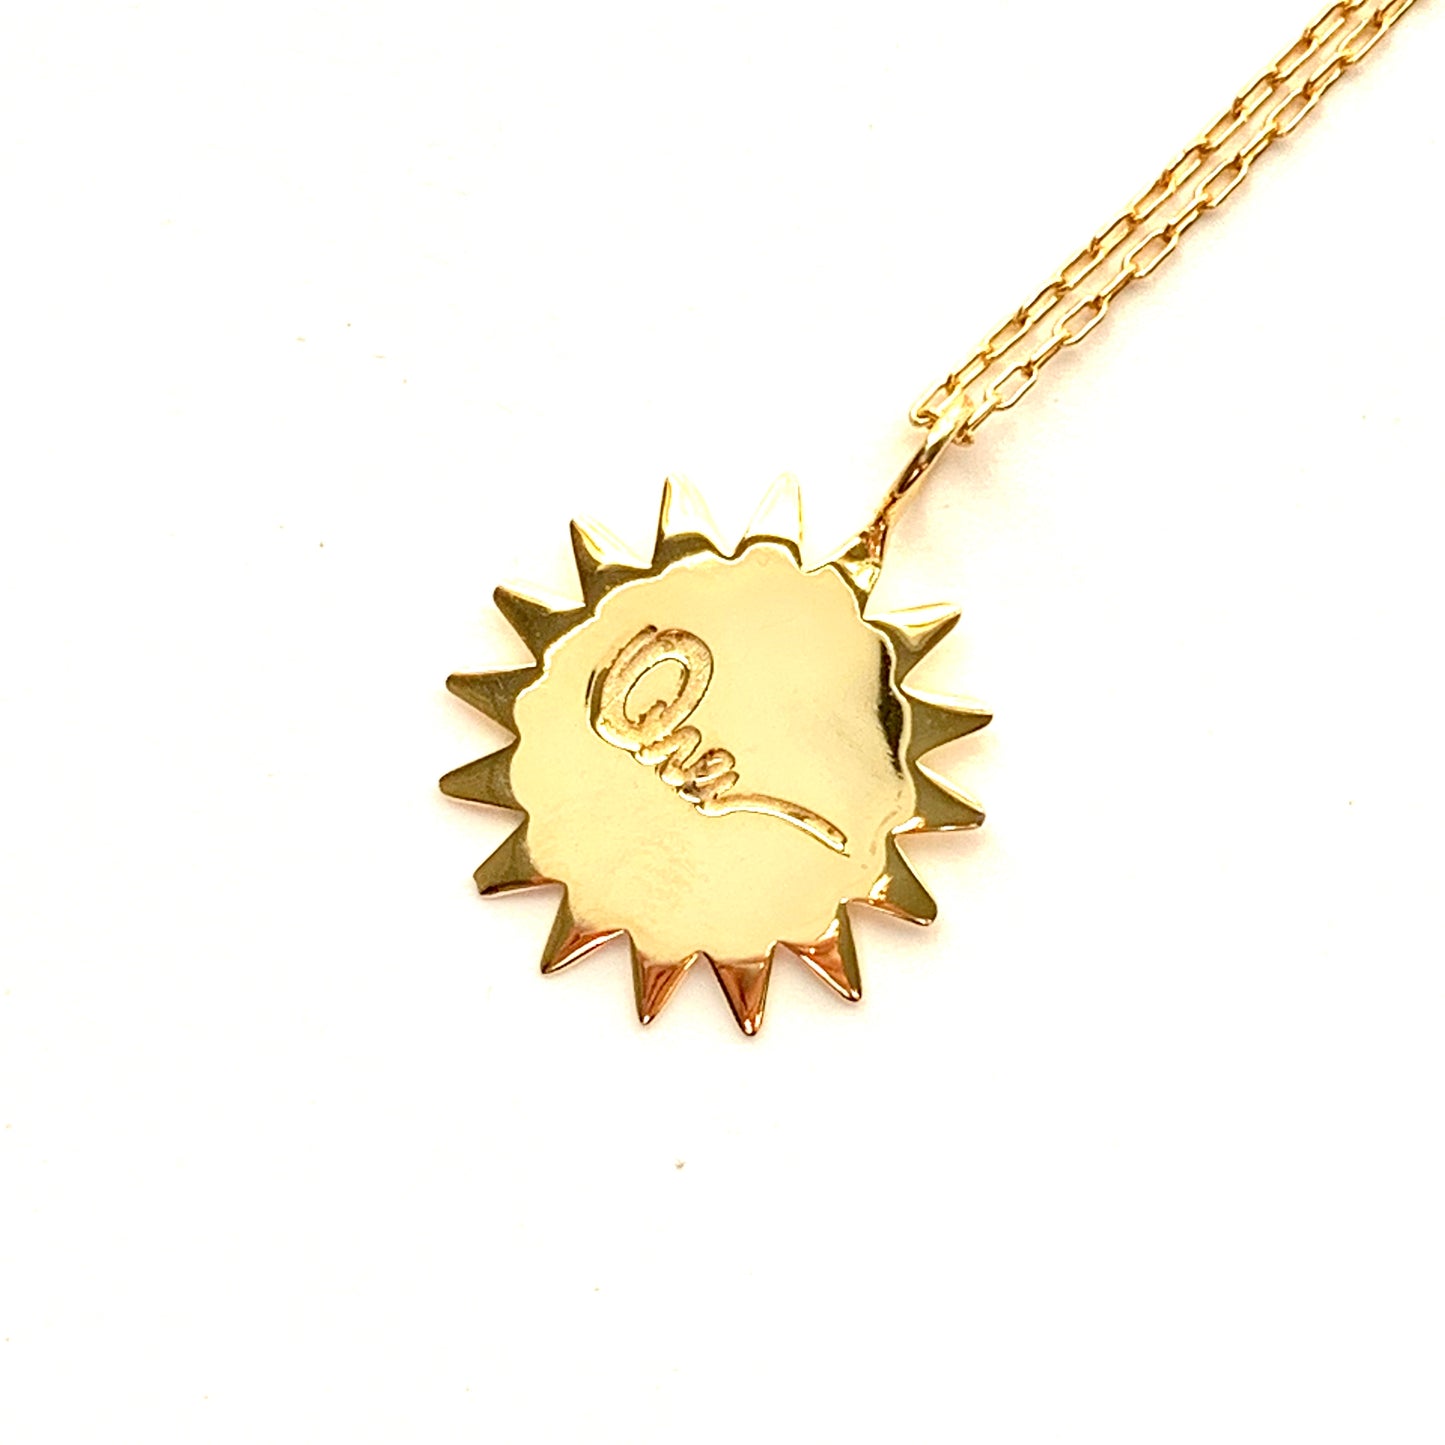 Sunburst with Large Rays in gold plate with rectangle chain